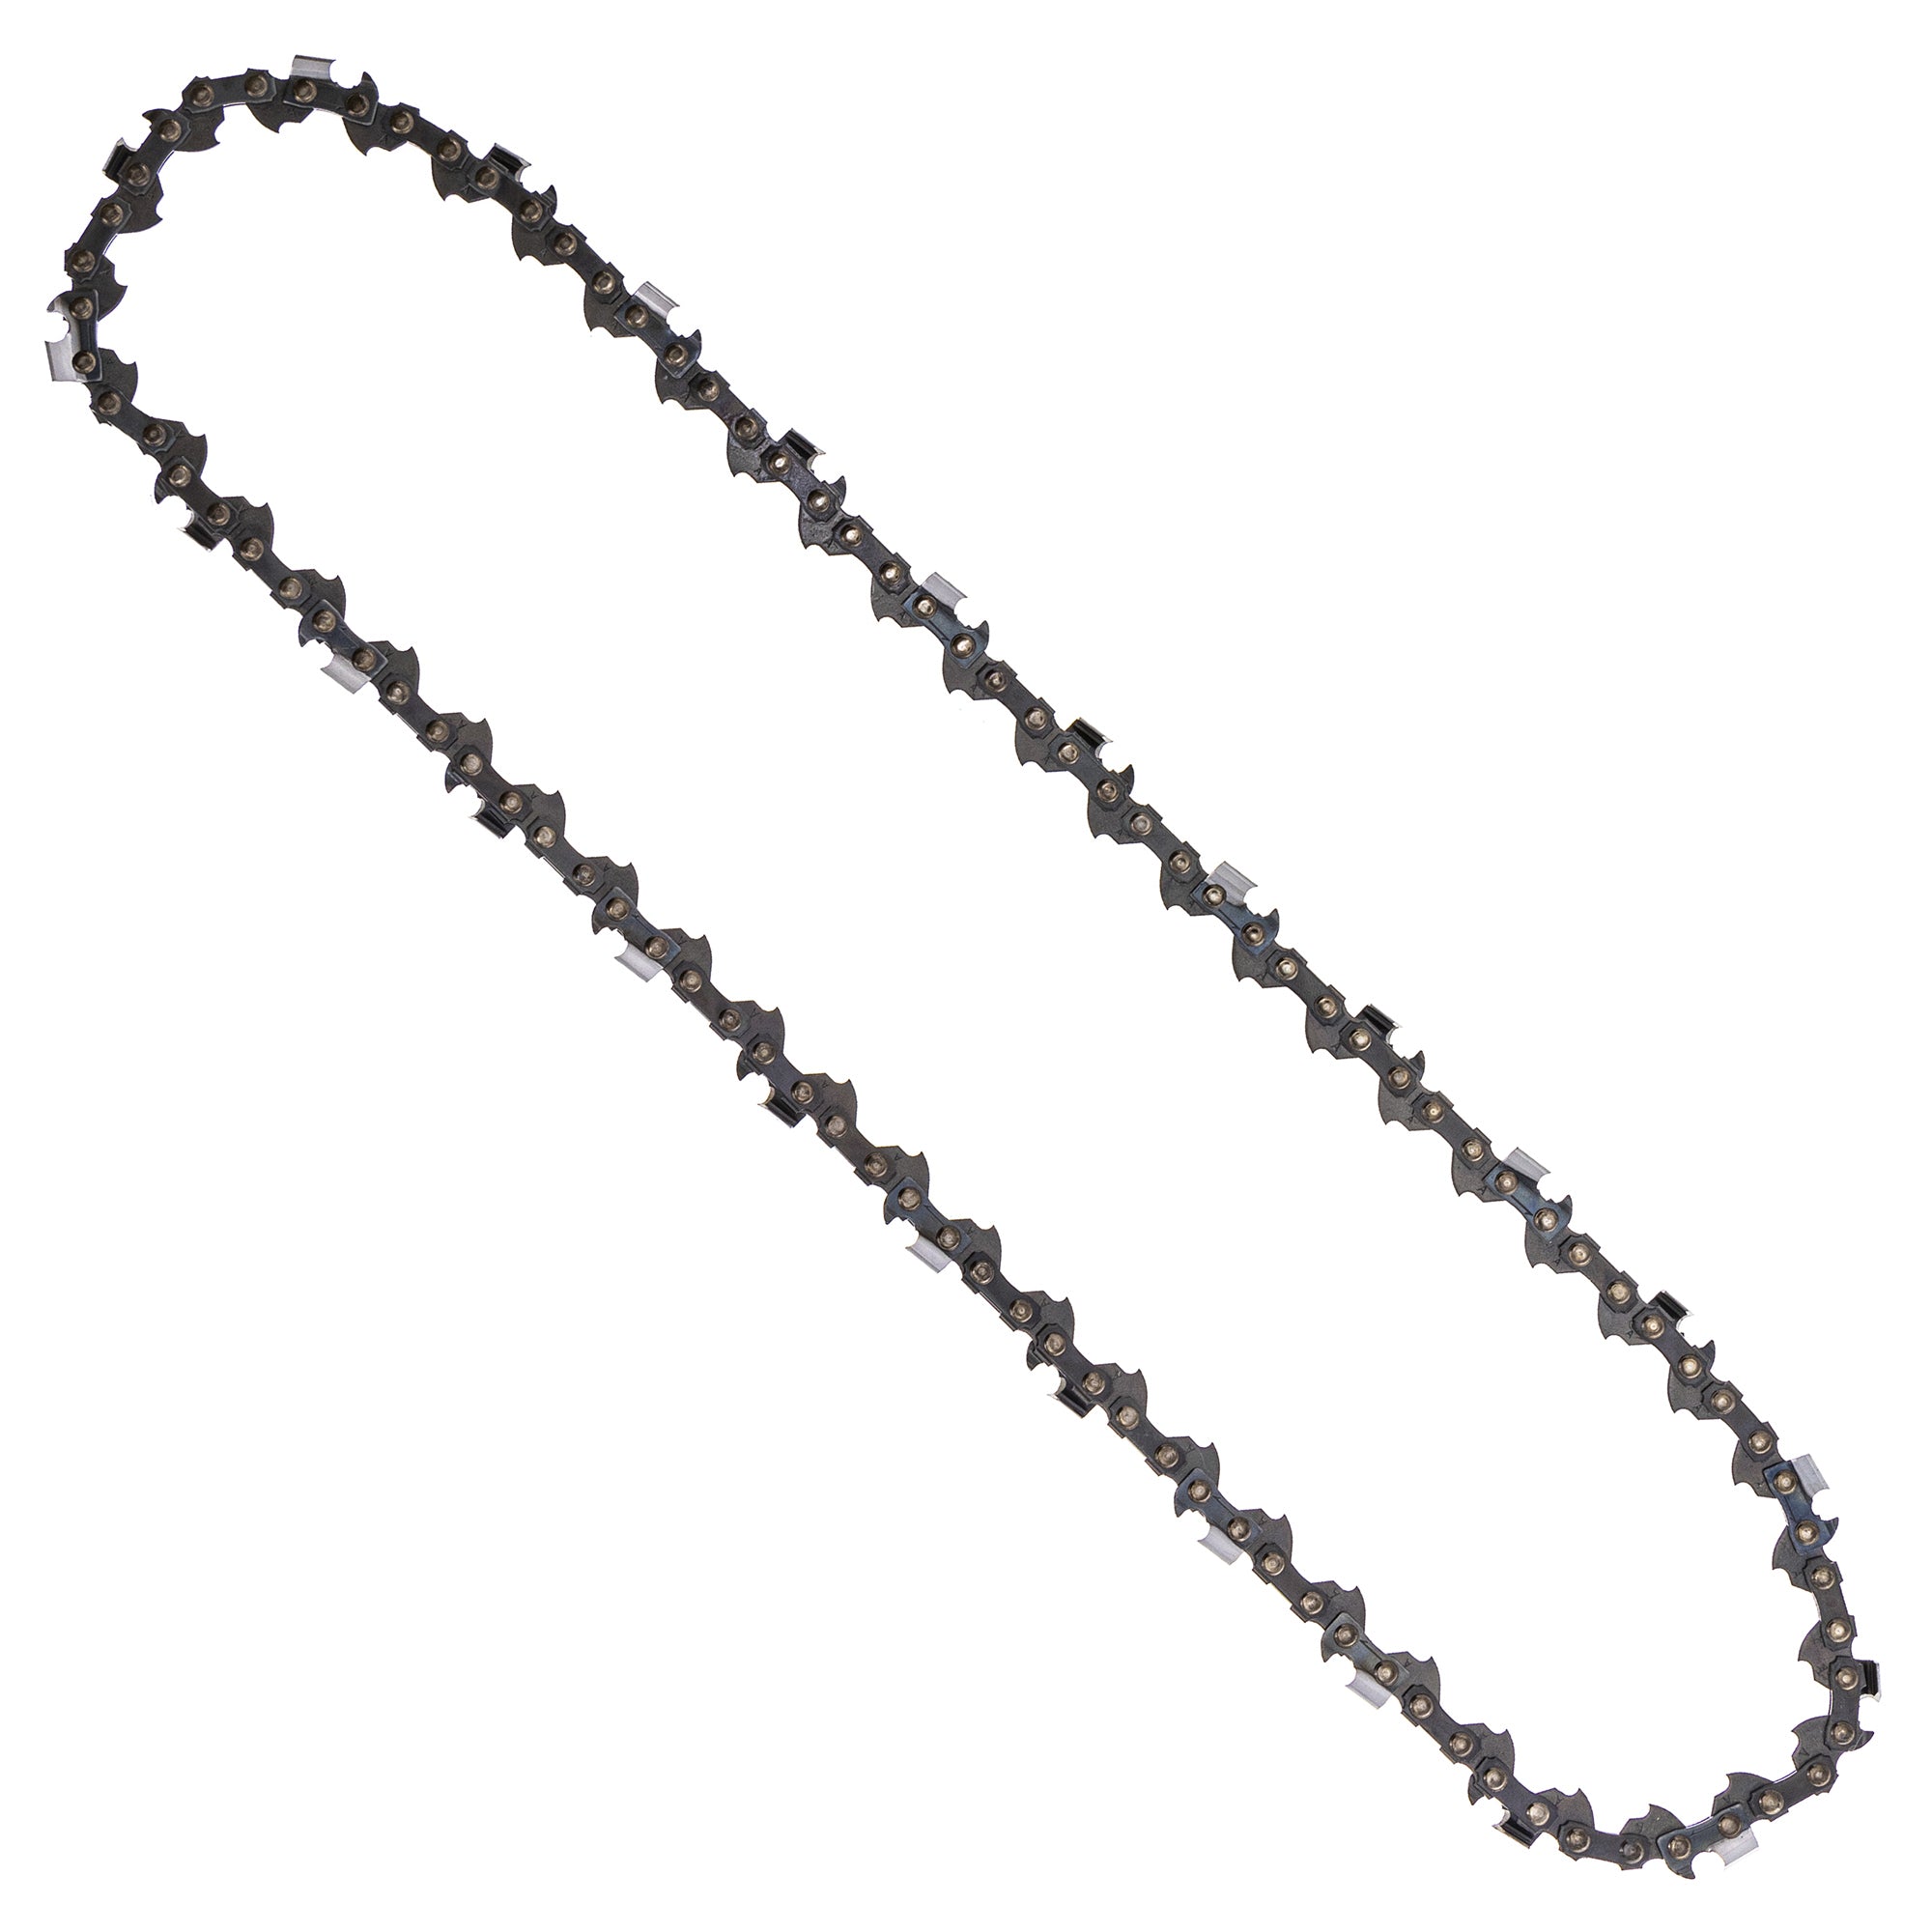 8TEN 810-CCC2234H Chain 10-Pack for zOTHER Stens Oregon Husqvarna